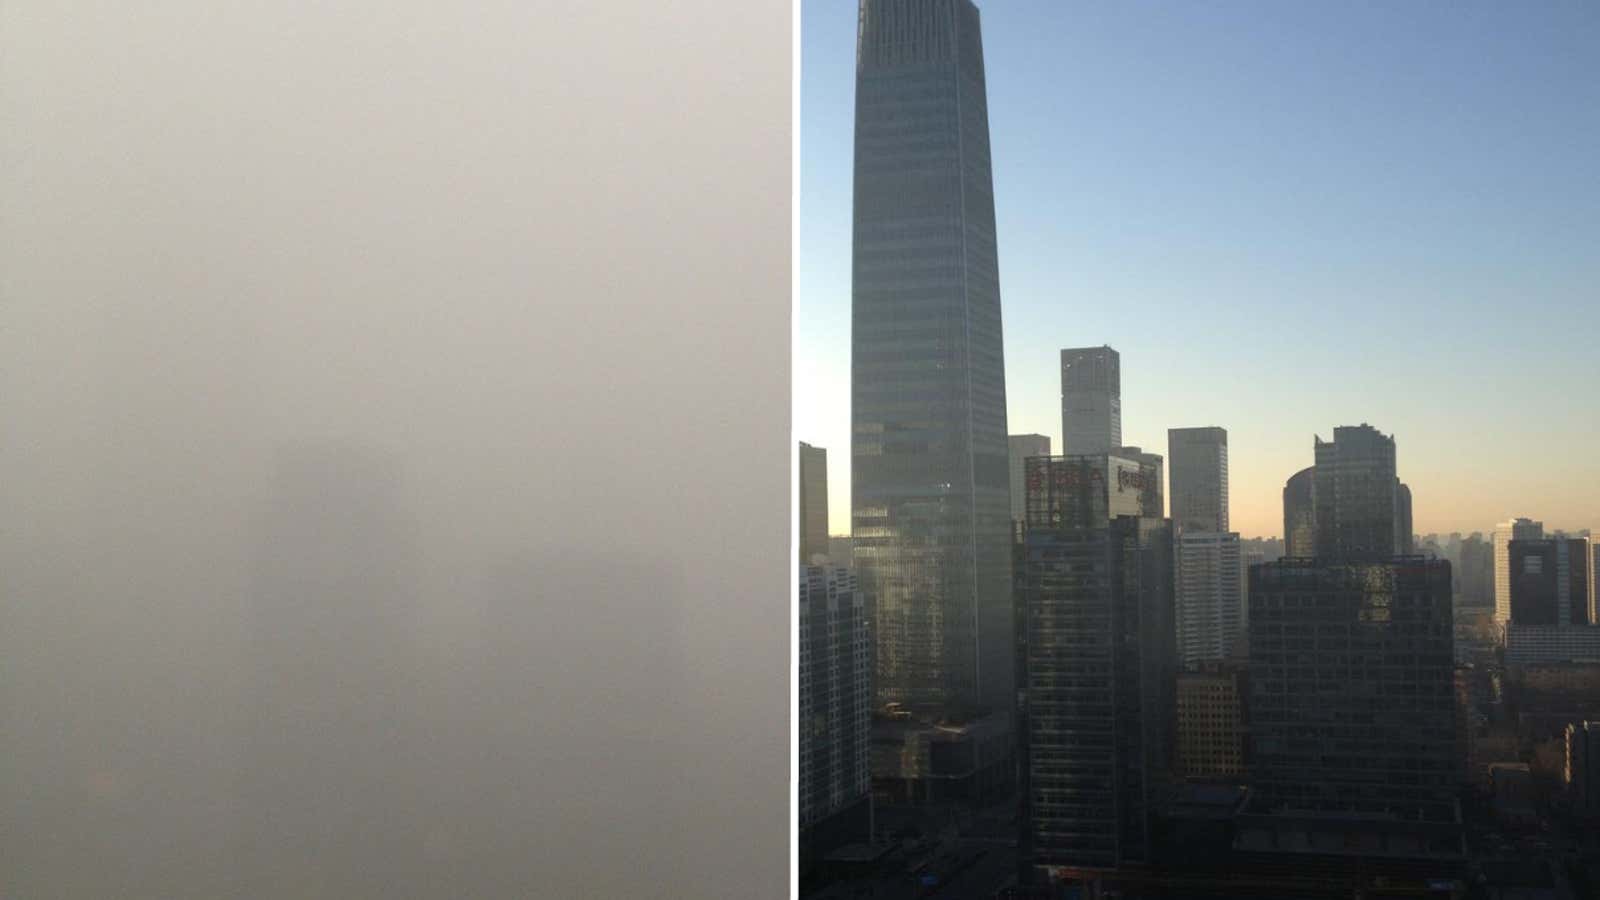 China World Trade Center Tower III is more than 1,000 feet tall and can’t be seen today in Beijing.